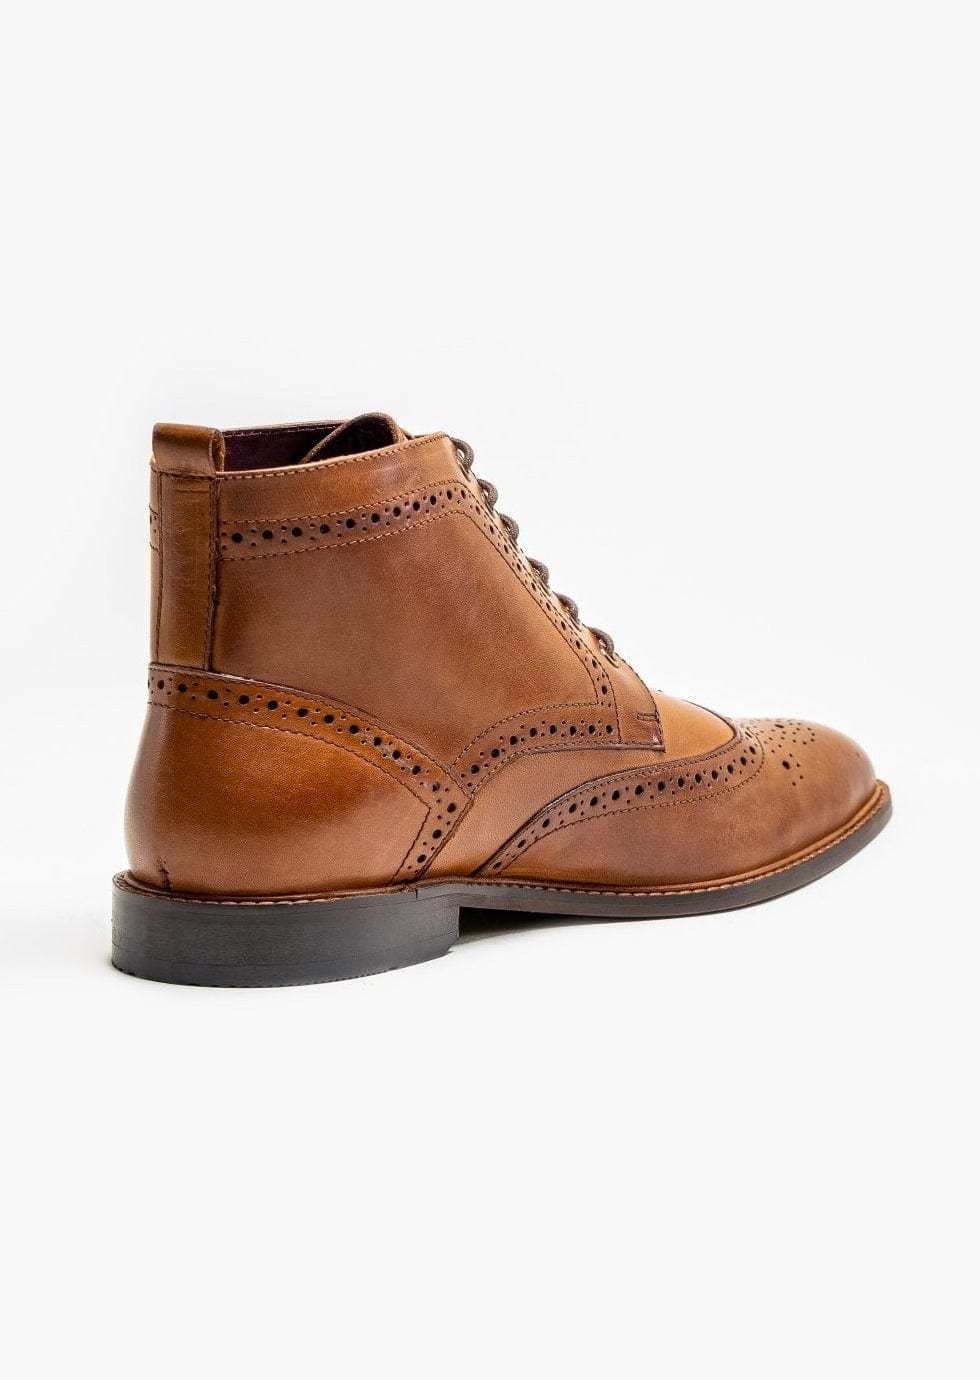 HOLMES TAN LEATHER LACE UP BOOTS